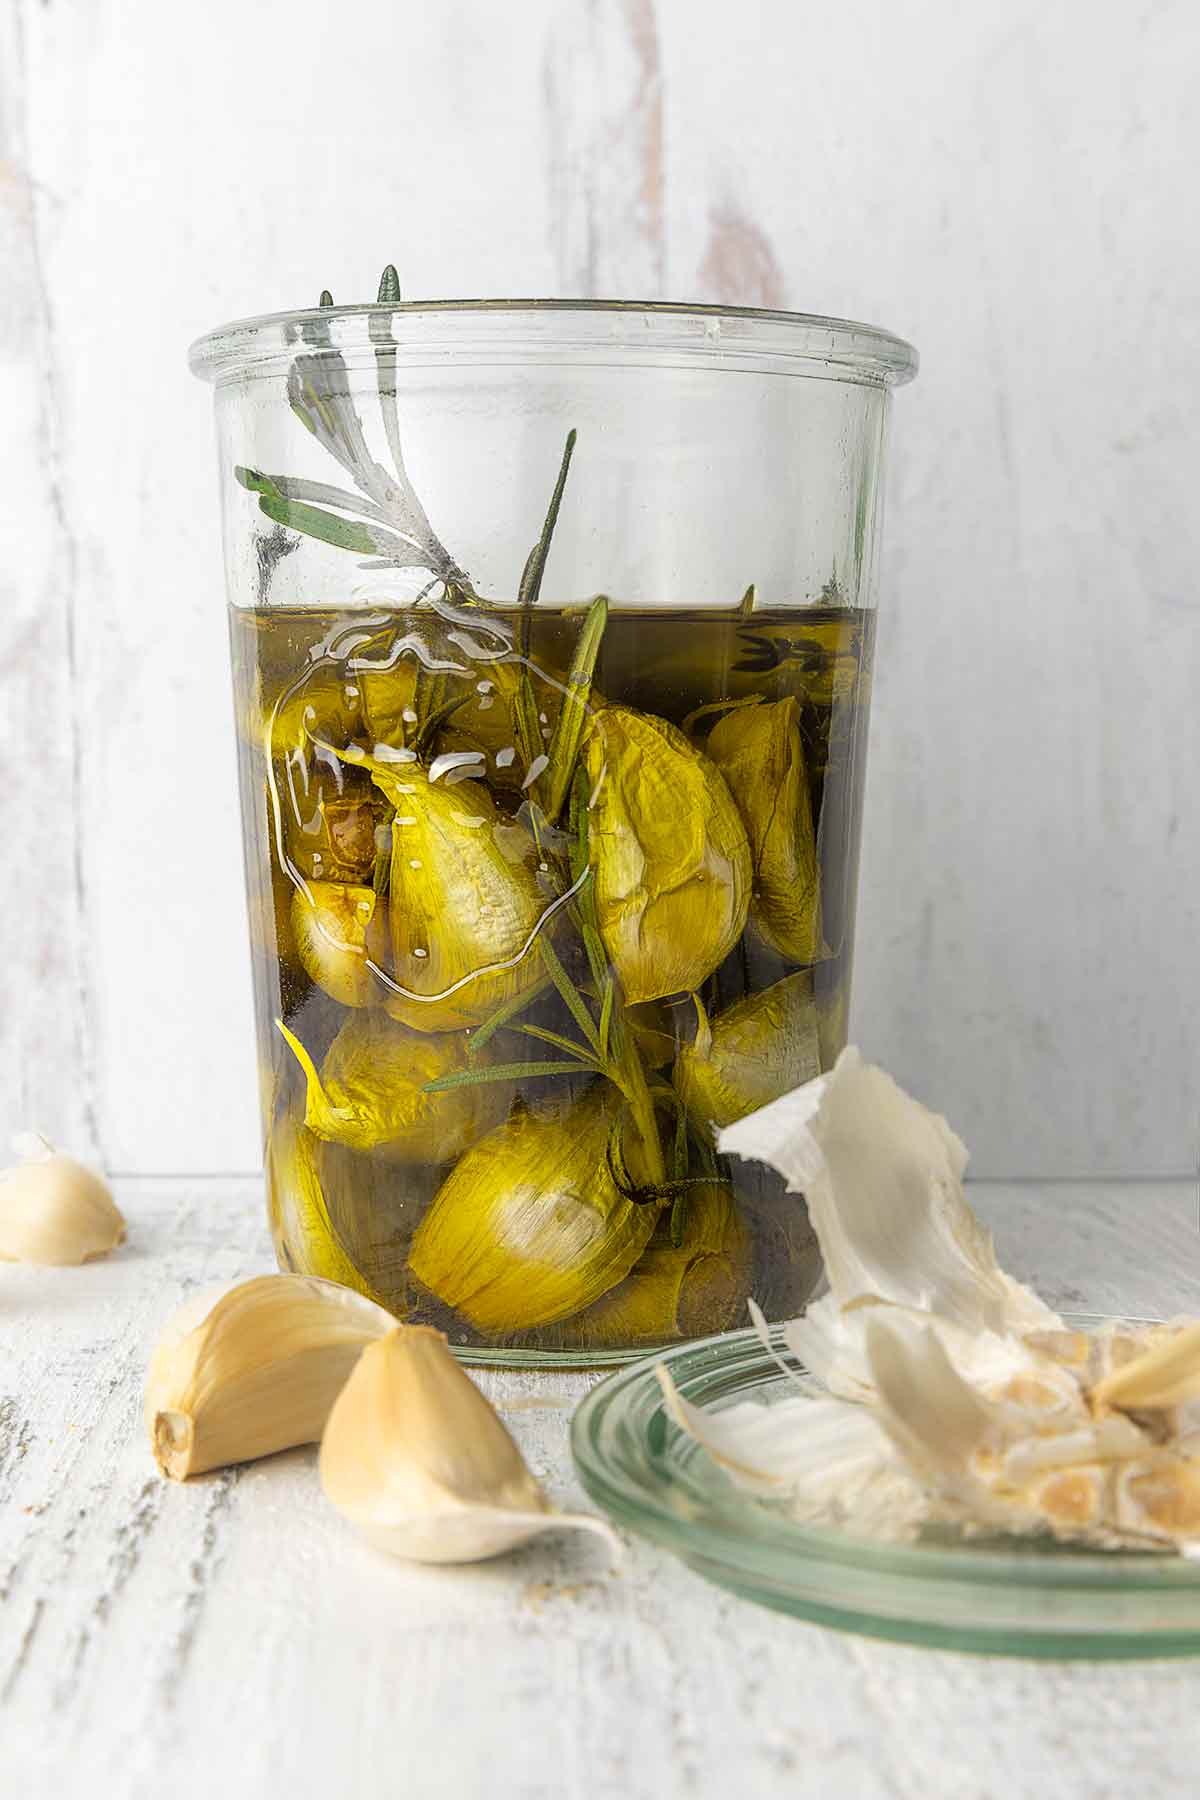 A jar of garlic confit with loose garlic cloves and husks nearby.